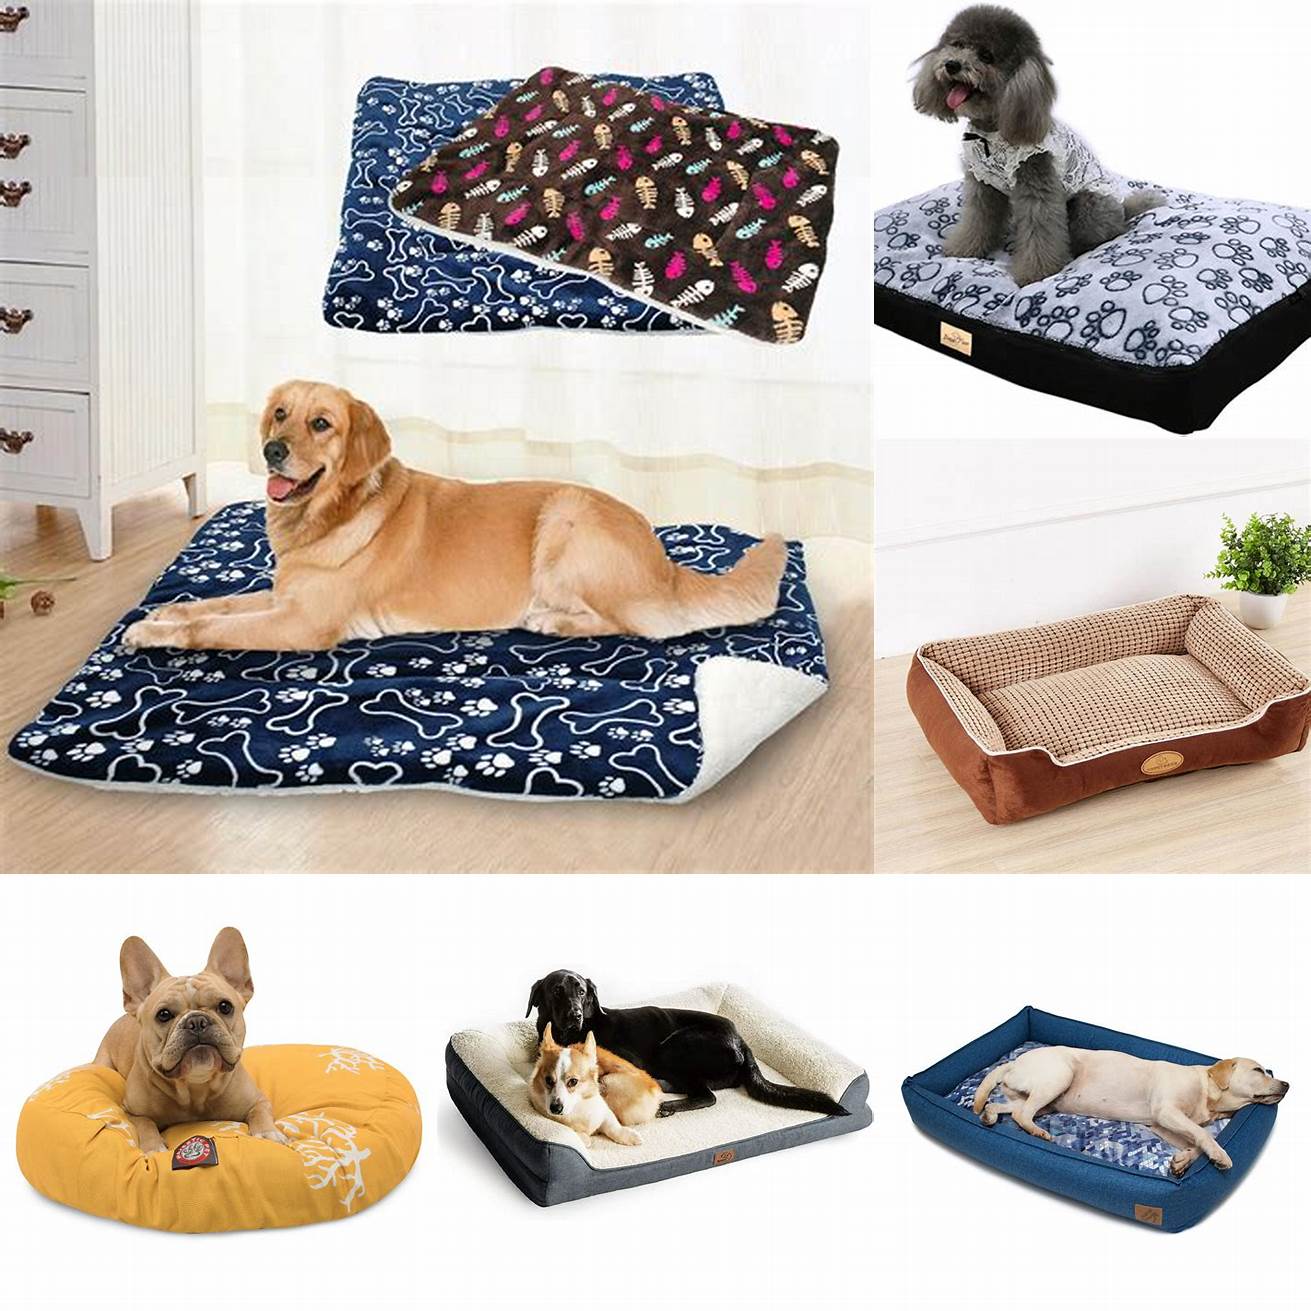 6 A pet bed with a removable machine-washable cover